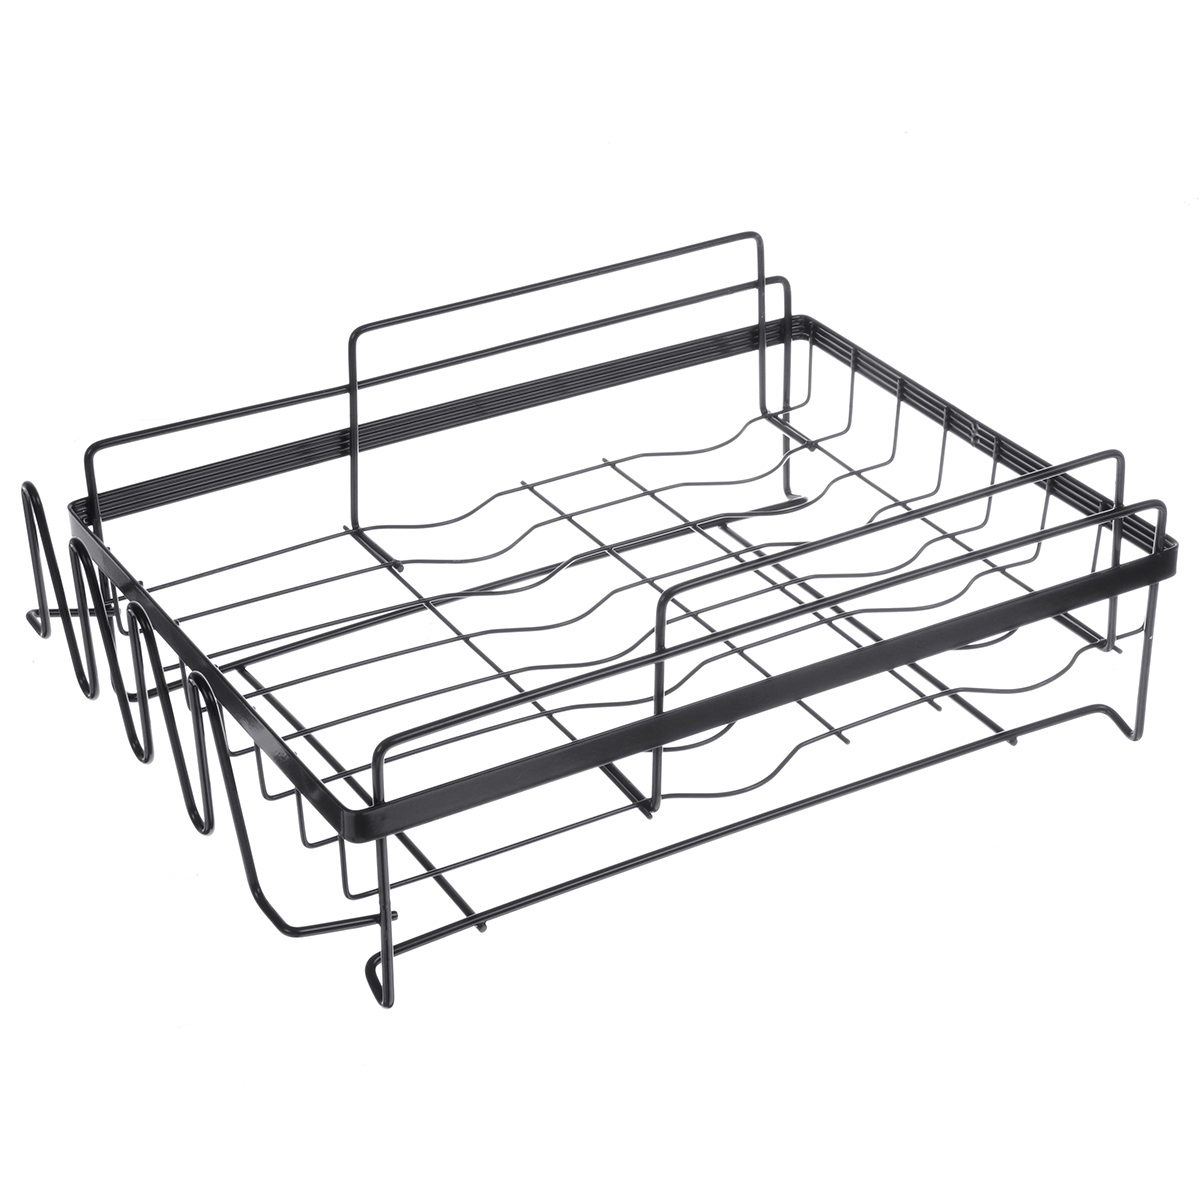 Find 2 Tier Multifunctional Kitchen Drying Dish Rack over Sink Drainer Shelf for Sale on Gipsybee.com with cryptocurrencies